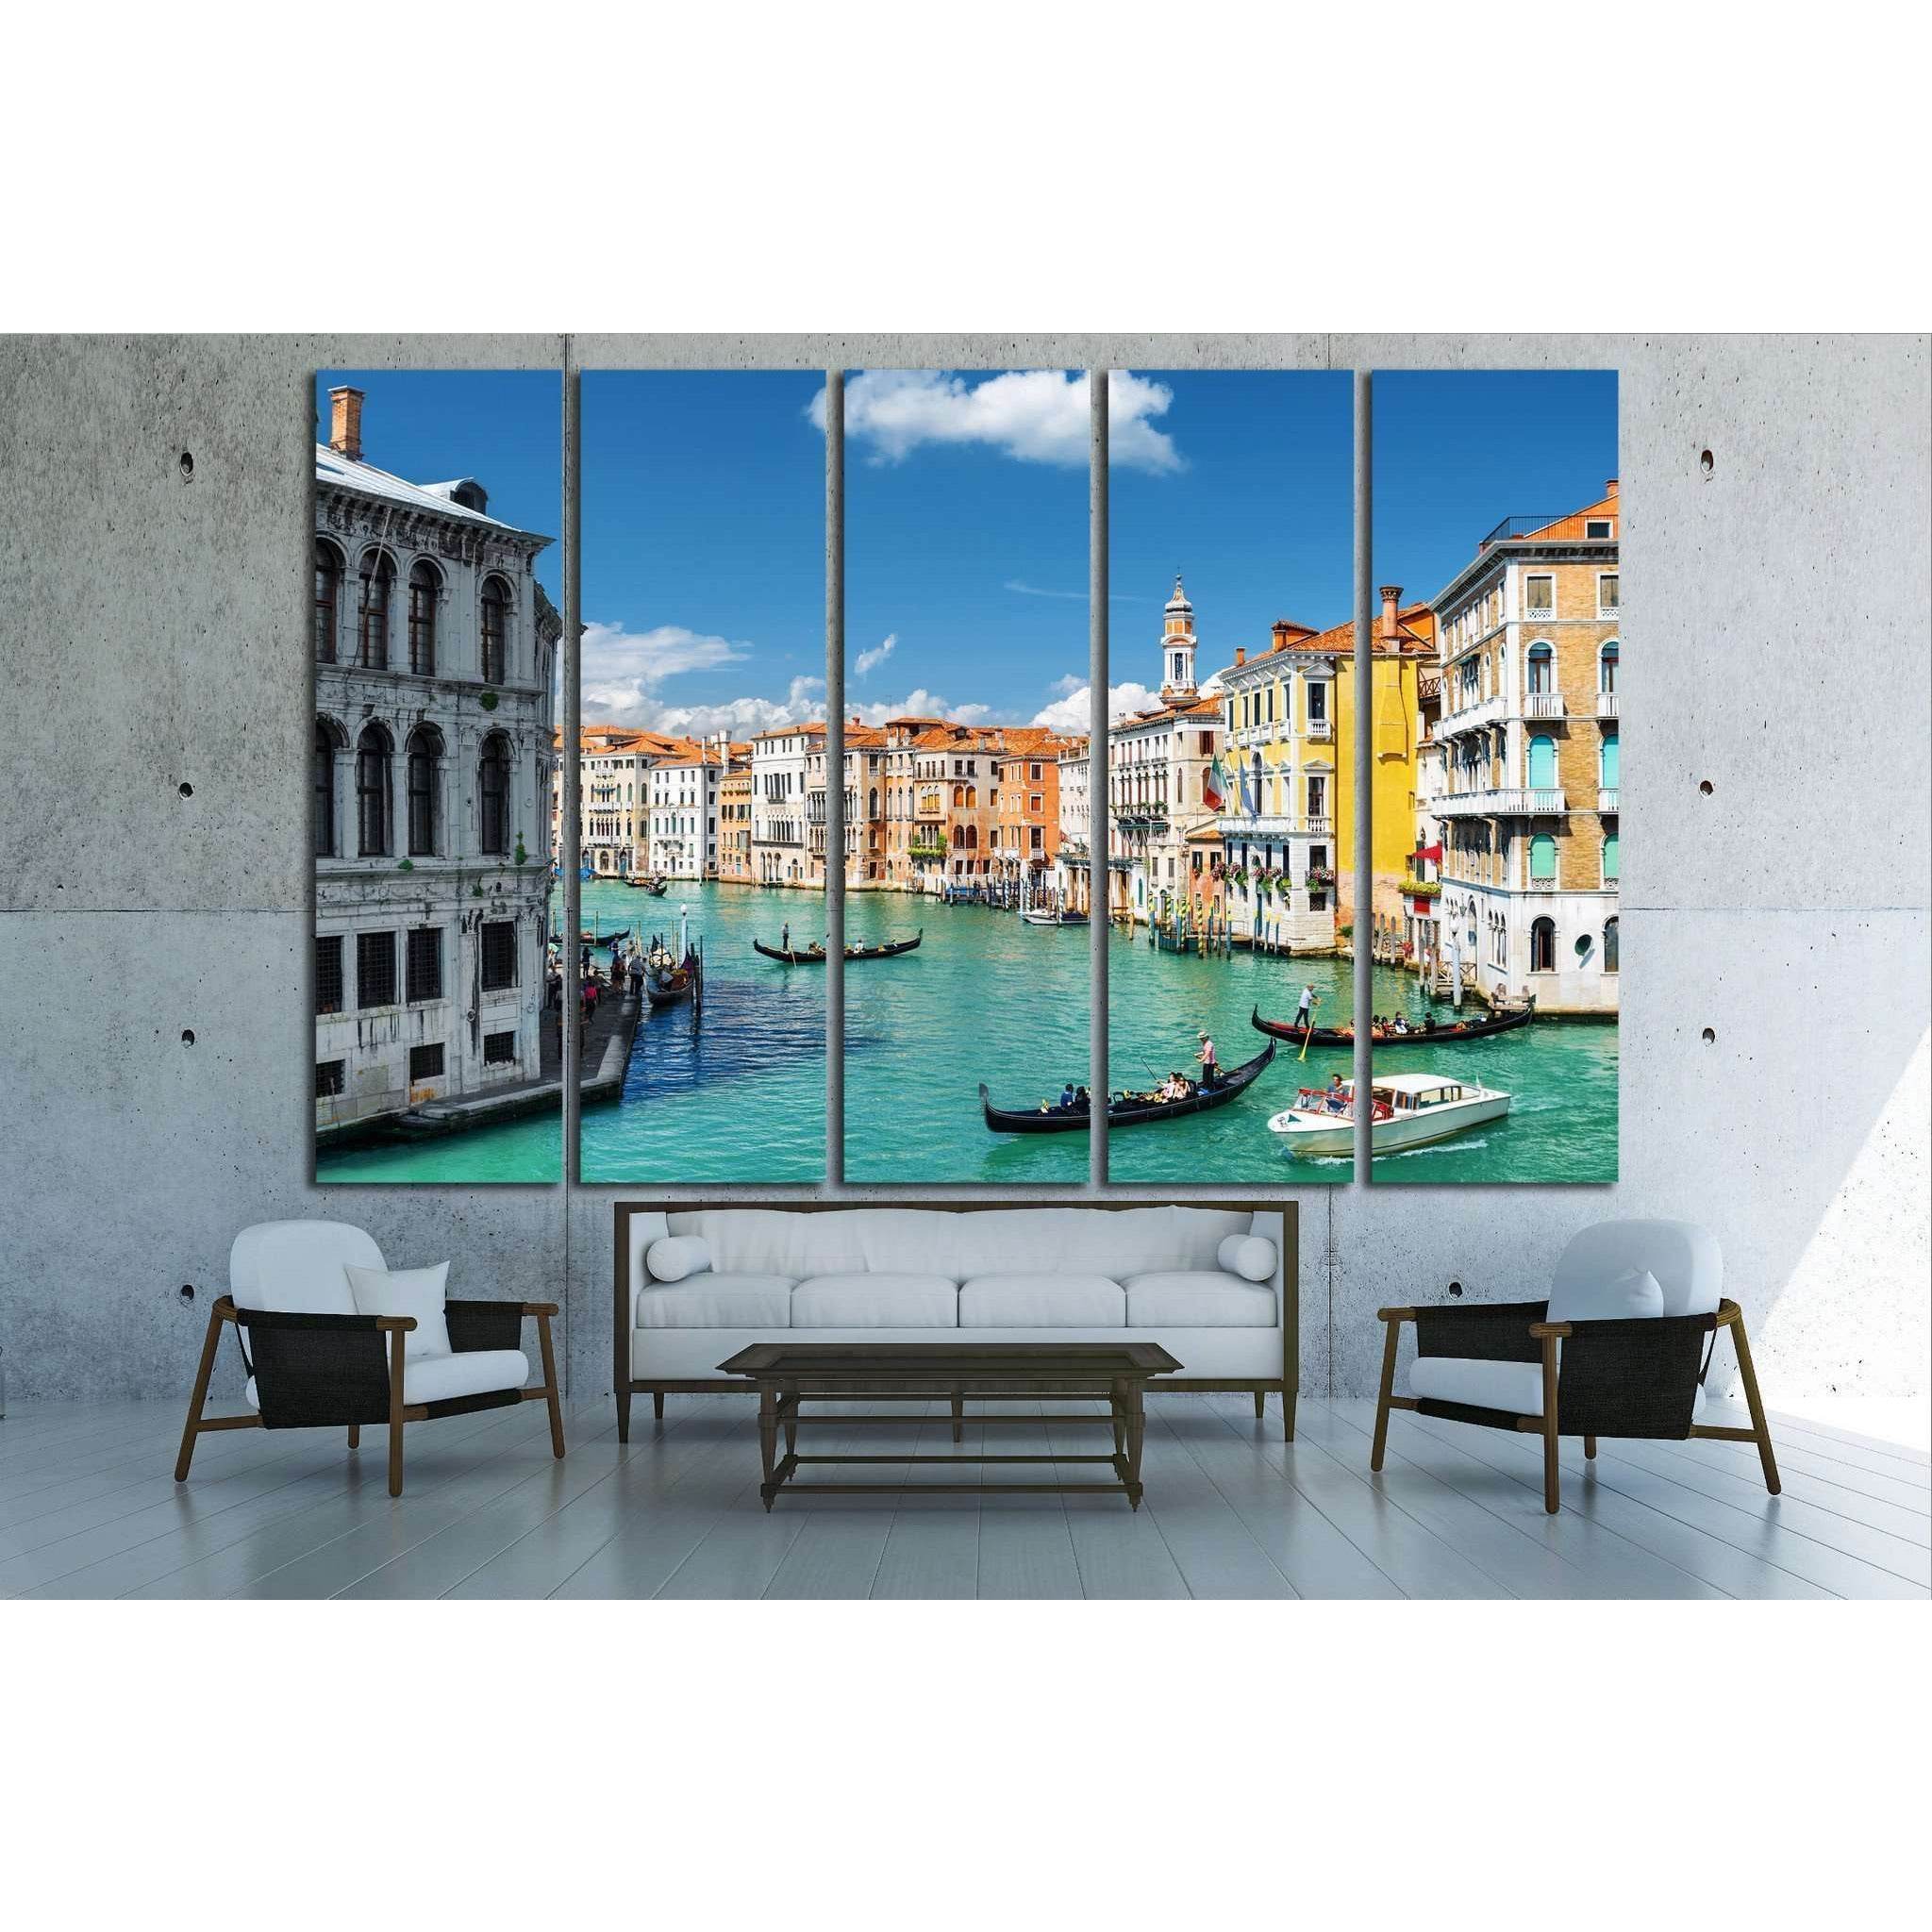 Palazzo dei Camerlenghi and the Grand Canal №1542 Ready to Hang Canvas Print